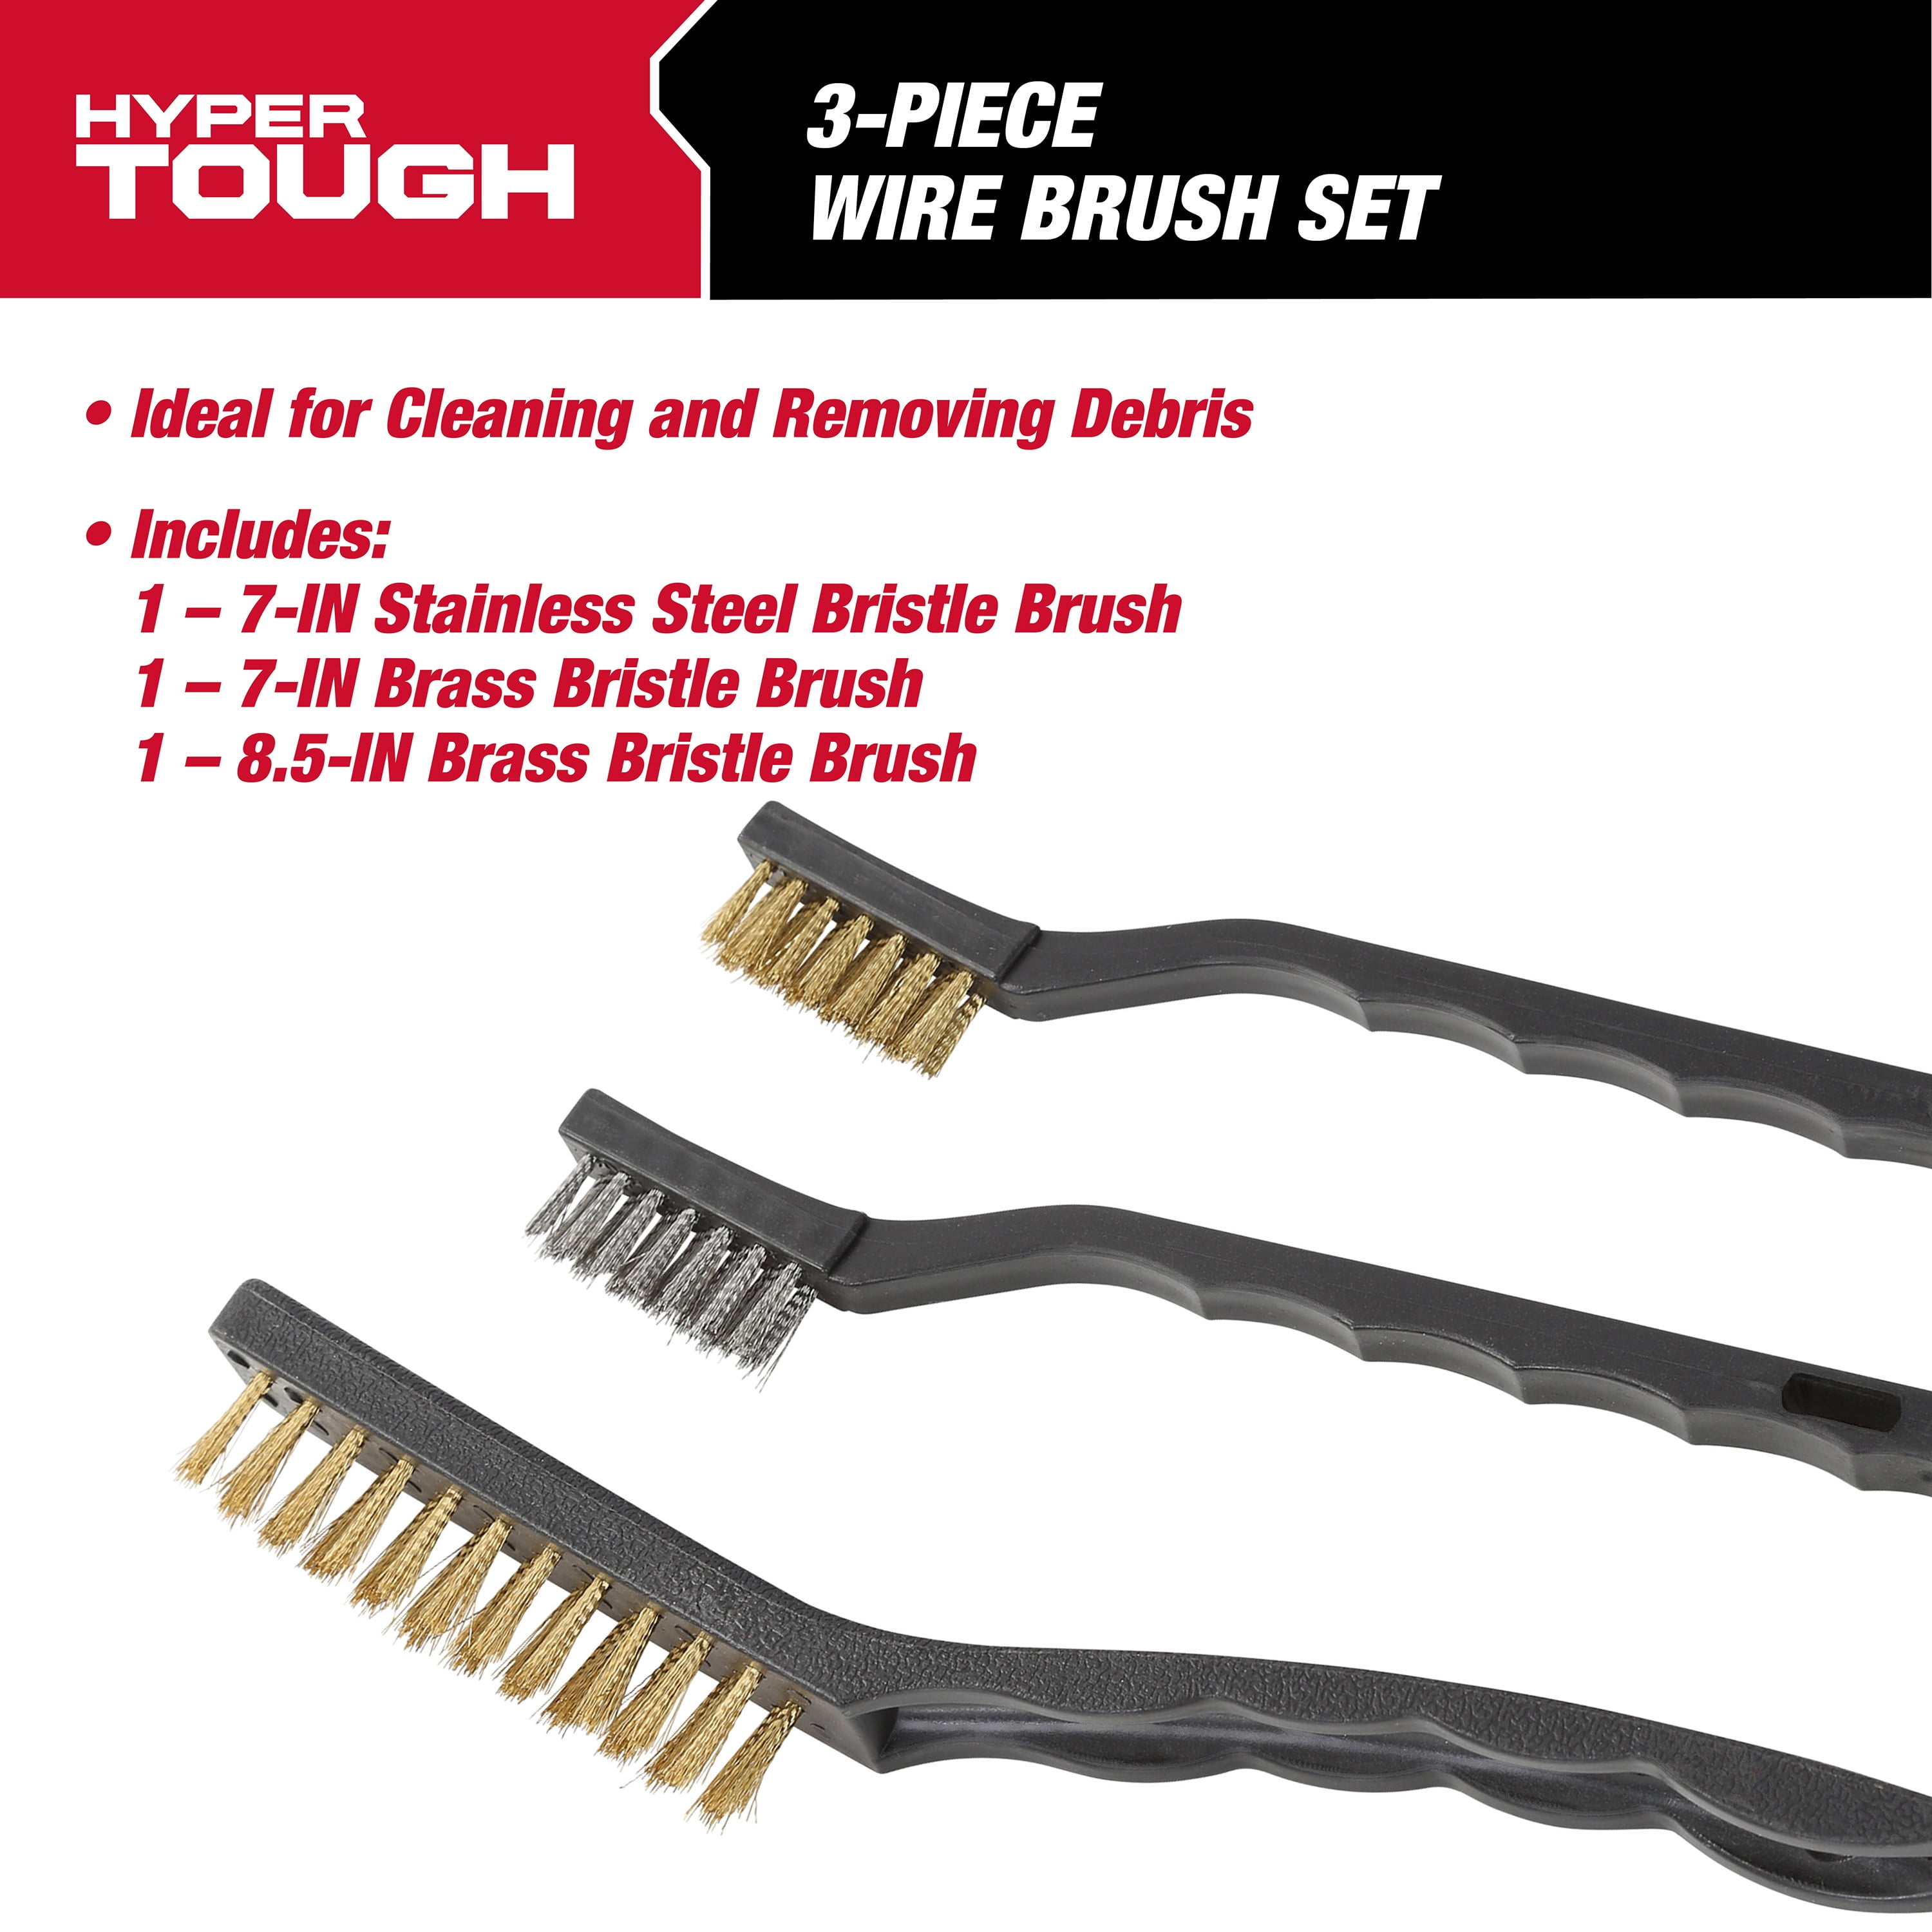 Set of 3 Pc Mini Wire Brush Cleaning Tool Kit Brass, Nylon, Stainless Steel